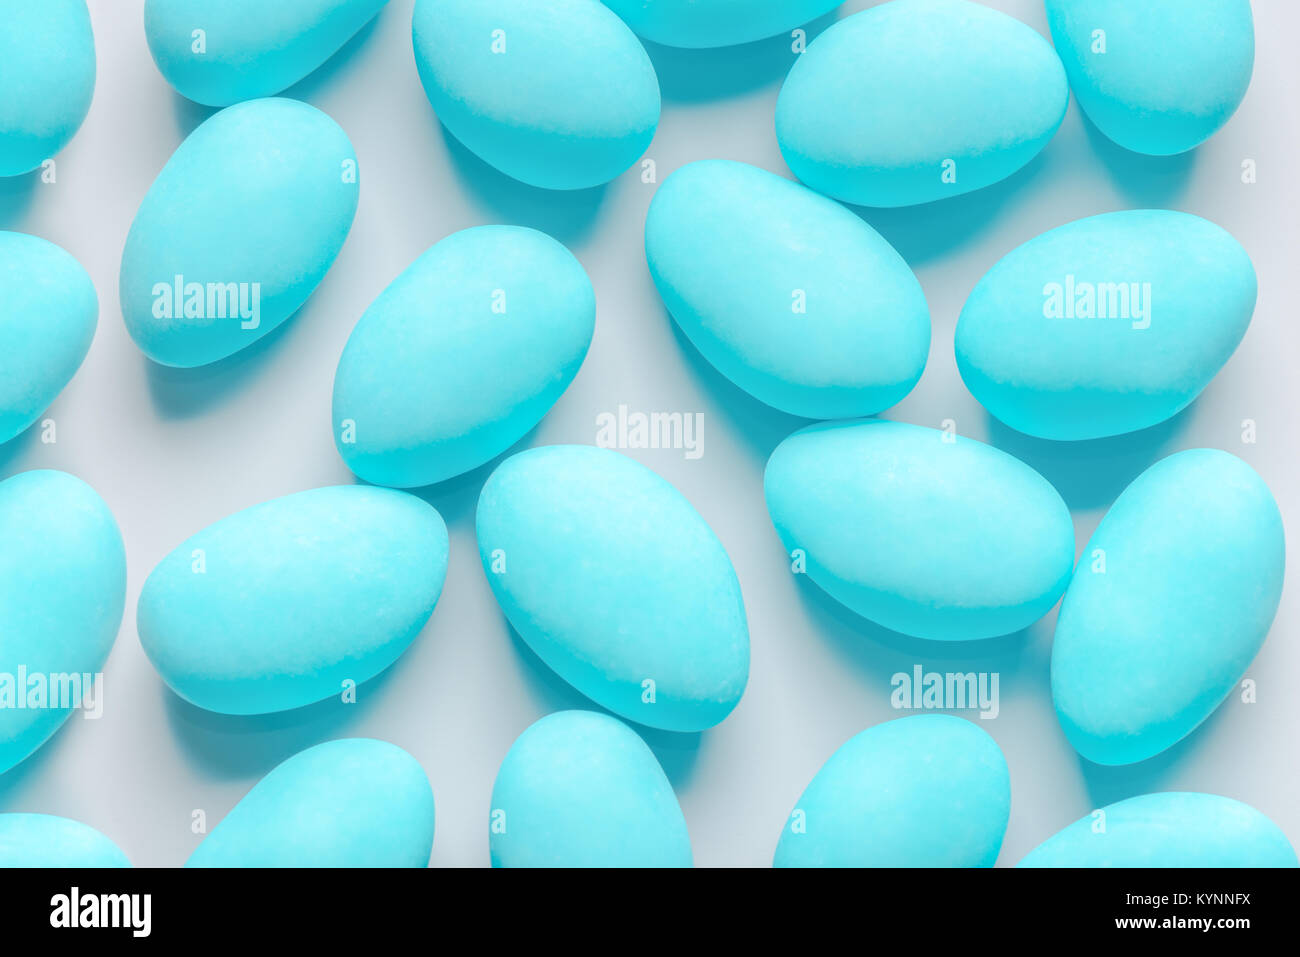 blue sugared almonds candy for wedding like background Stock Photo